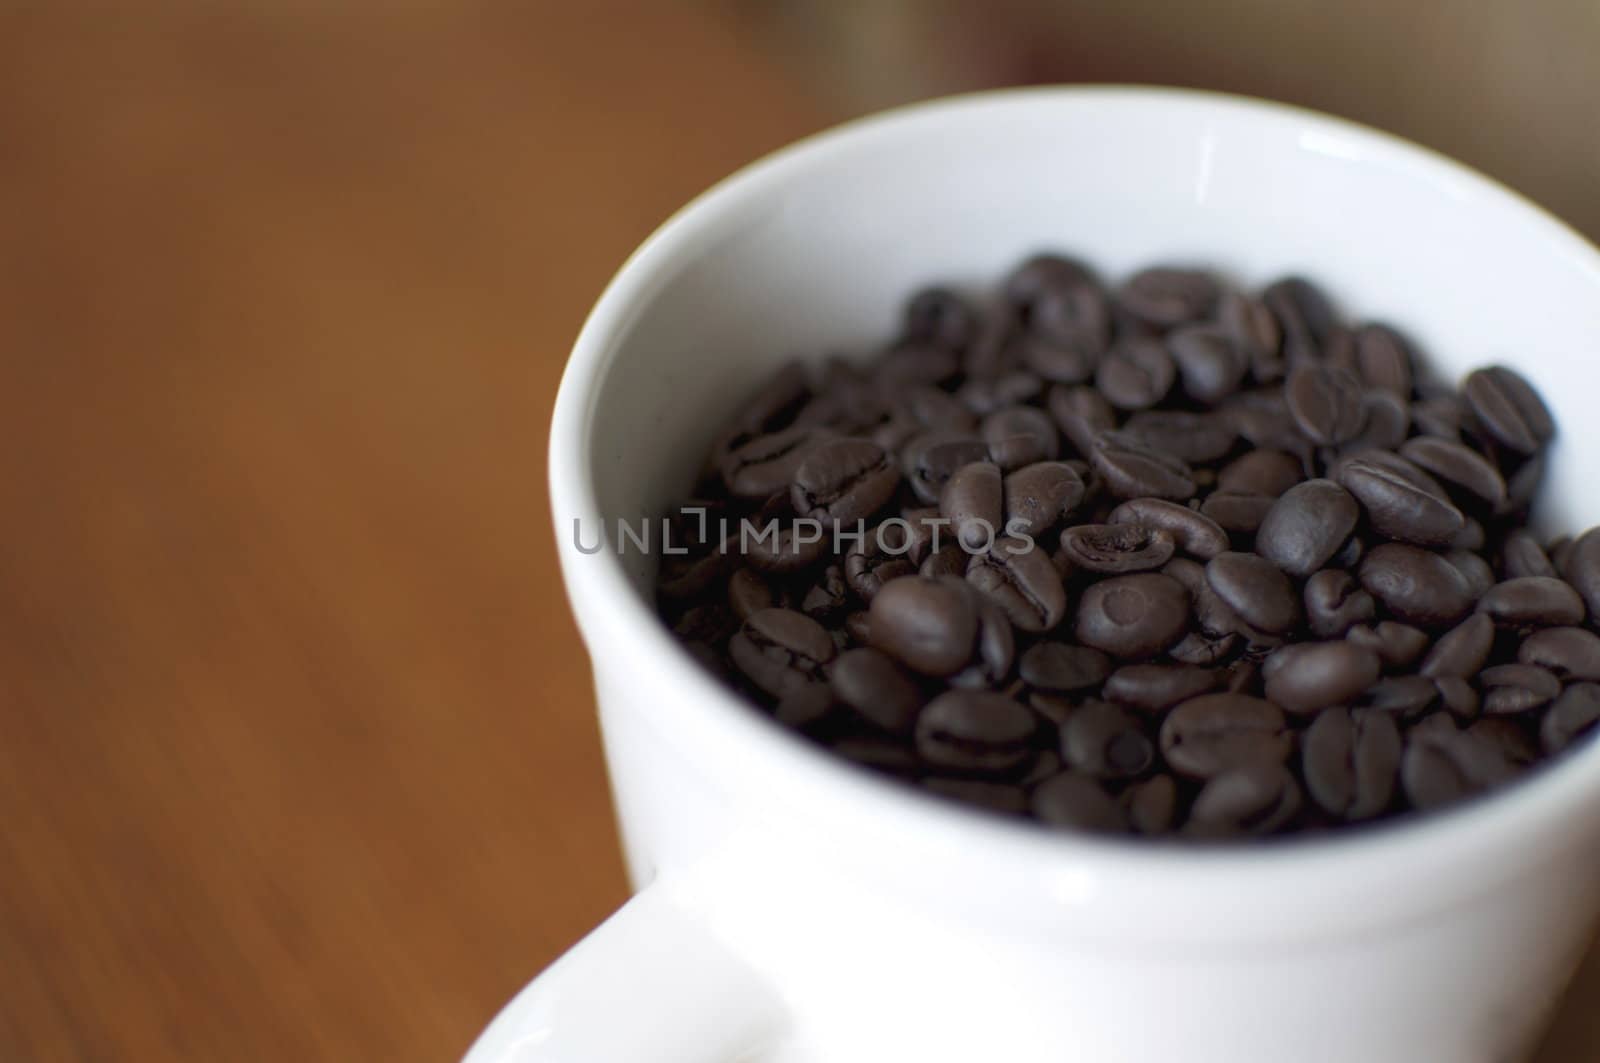 Coffee Beans in a White Porcelain Mug by gilmourbto2001